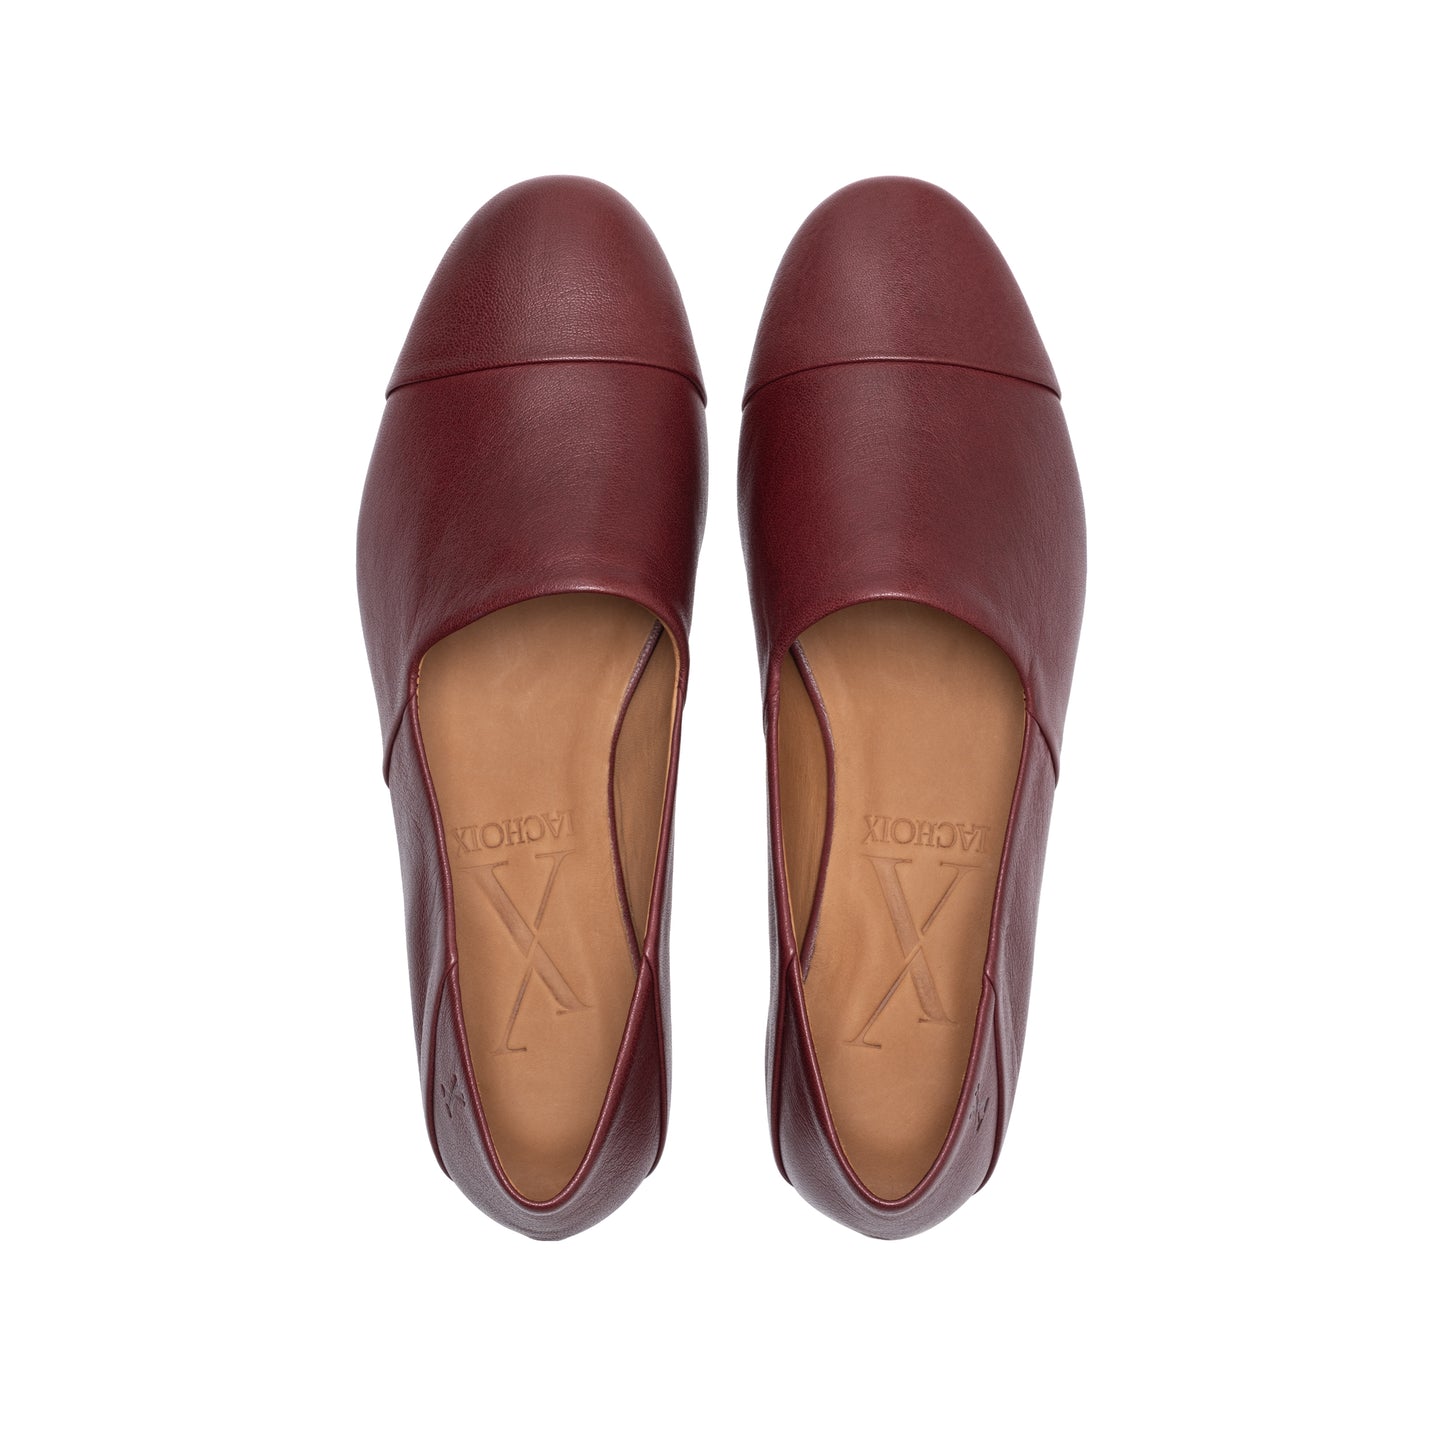 Red Blood Leather Slip-On